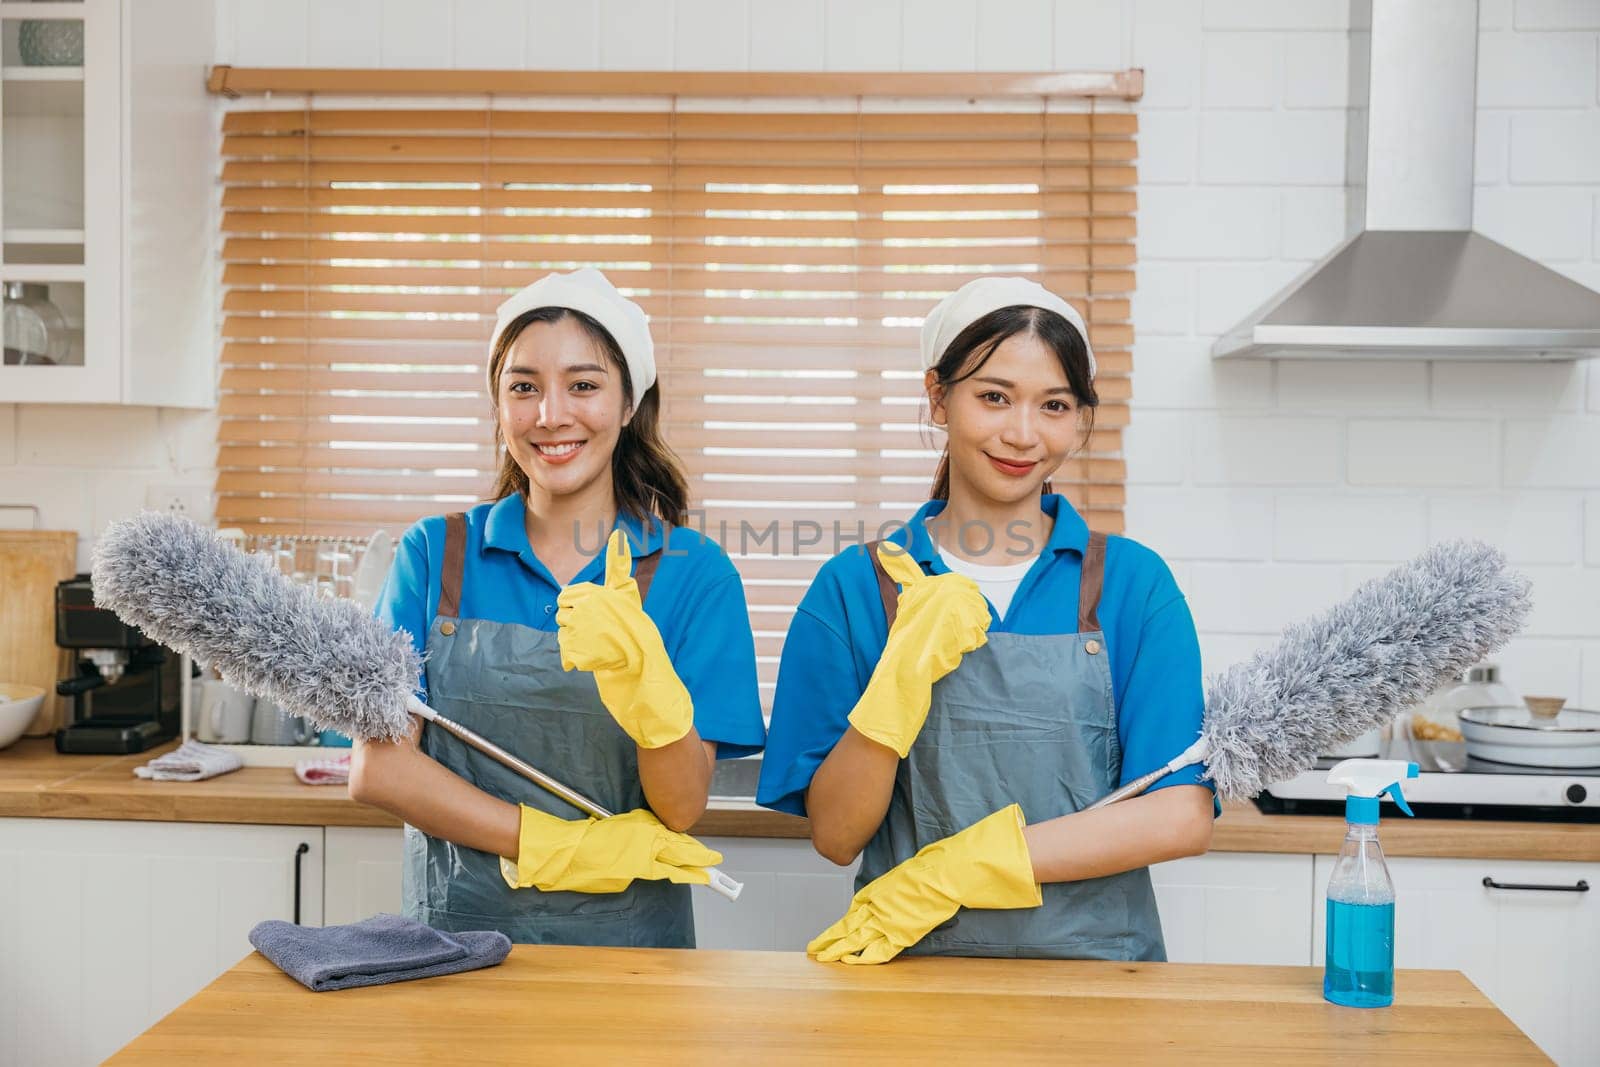 Cleaning service women in uniform stand on kitchen counter holding duster foggy spray and rag. Emphasizing teamwork in efficient housework. Clean portrait two uniform maid working smiling employee.